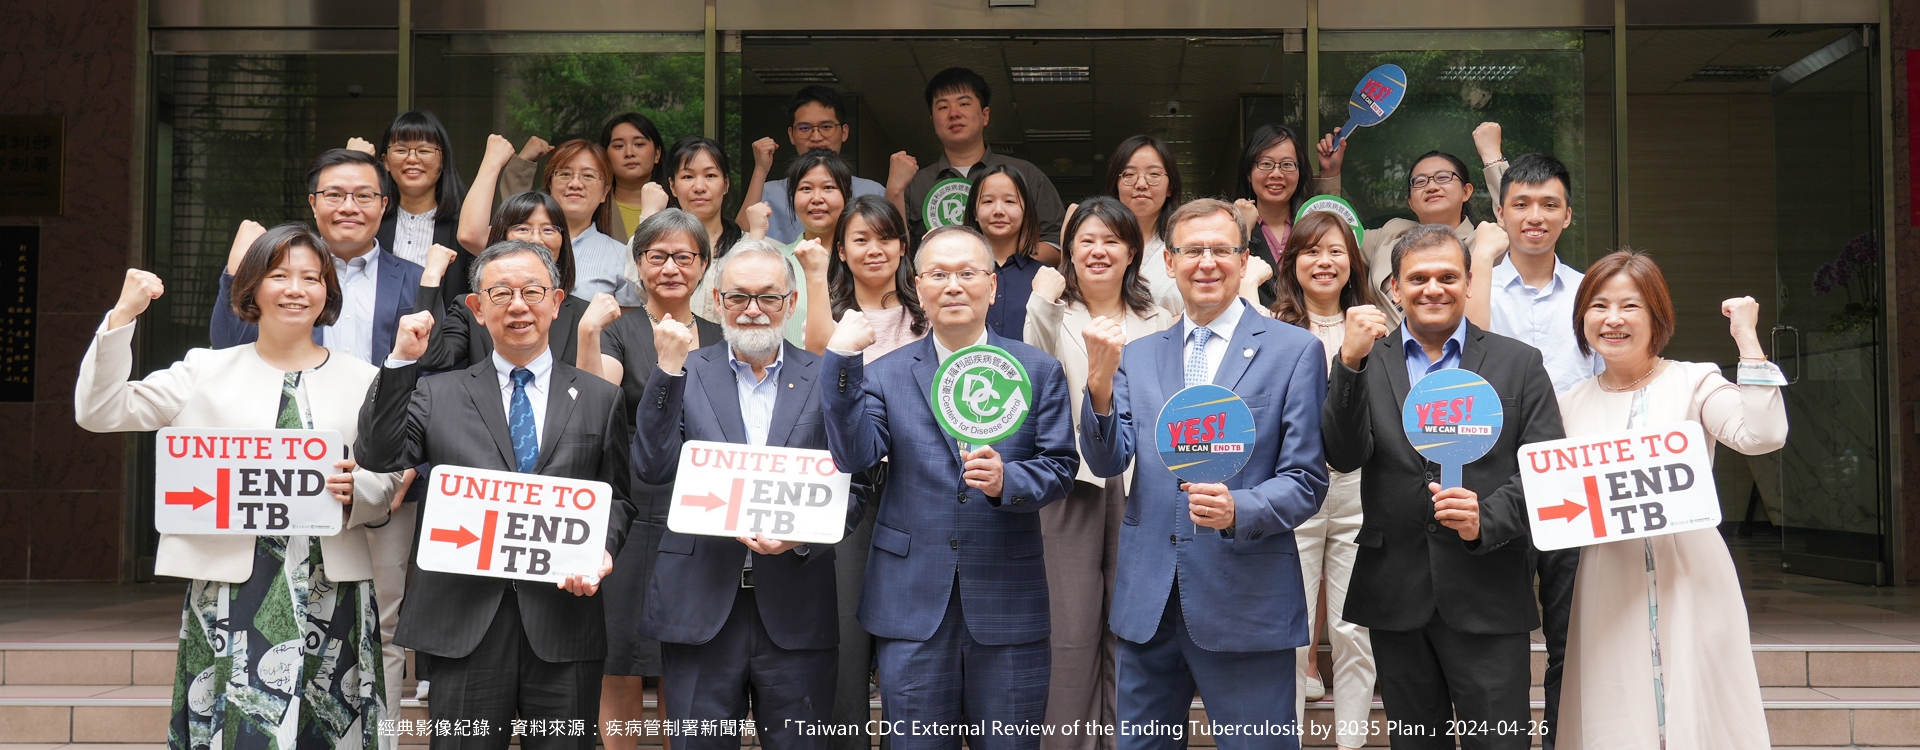 Taiwan CDC External Review of the Ending Tuberculosis by 2035 Plan